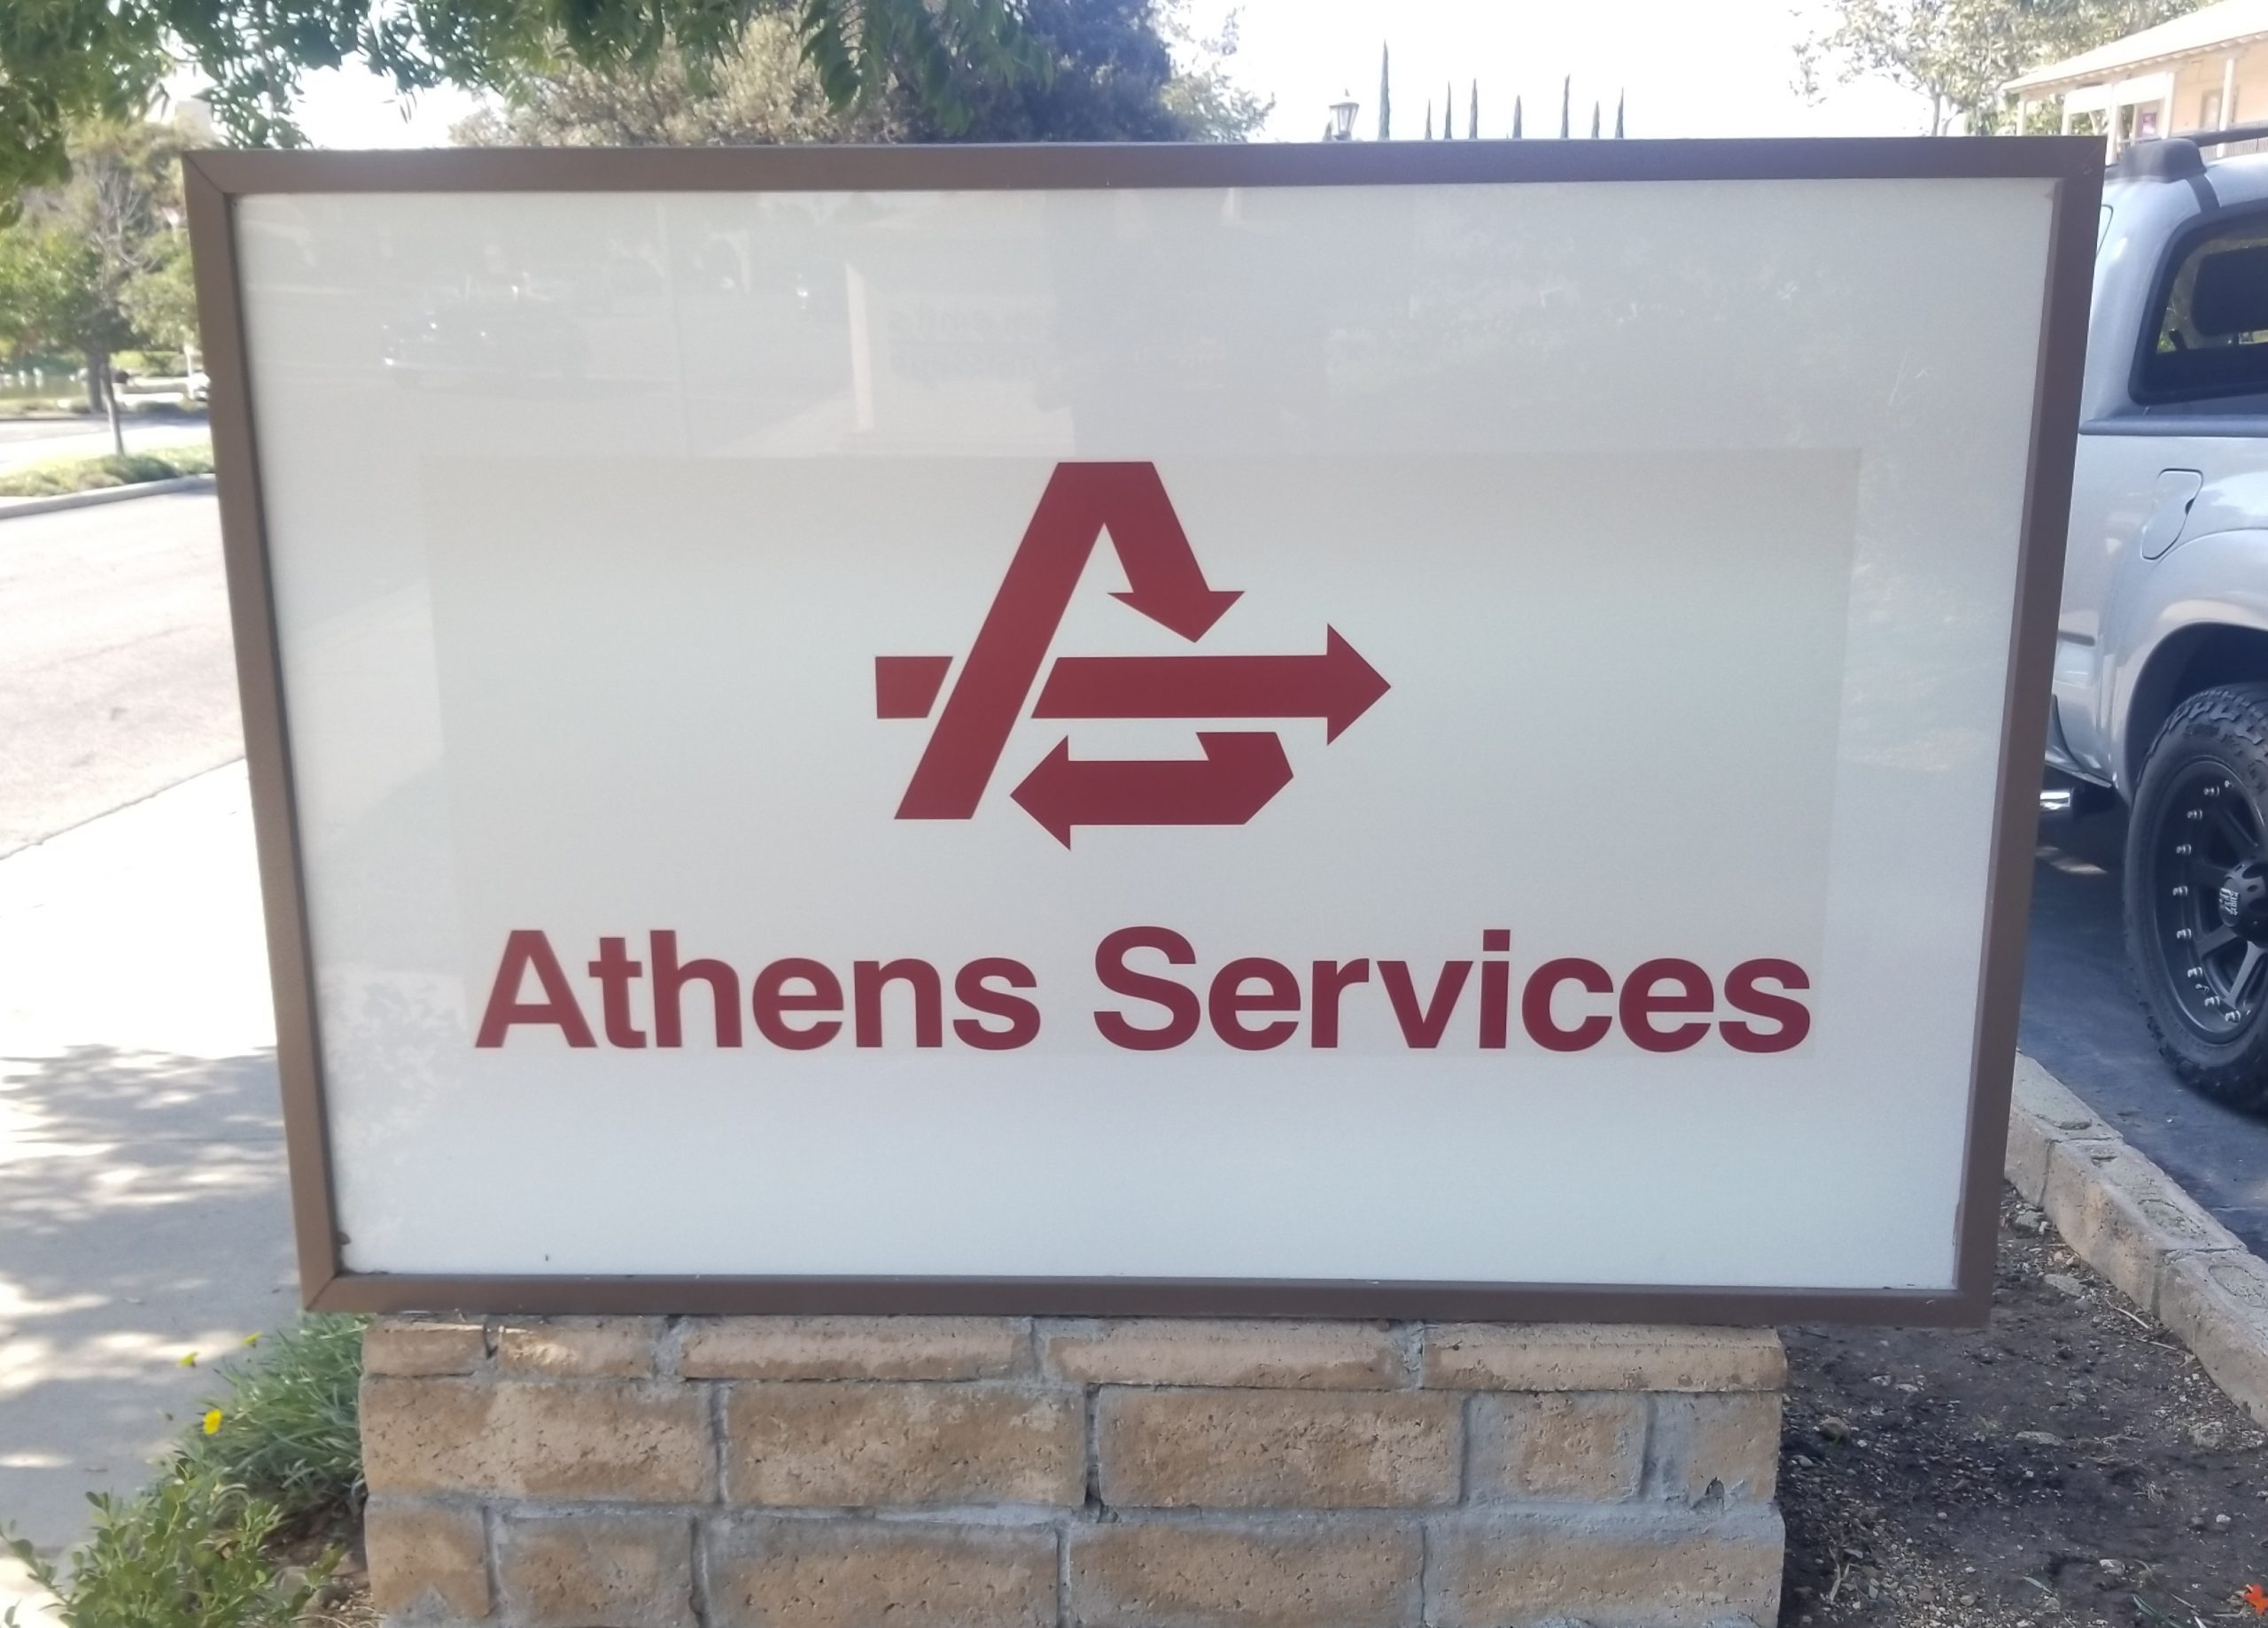 These are the monument sign lightbox inserts we made for Athens Services. The inserts are for the Thousand Oaks' monument sign that we built a year ago.